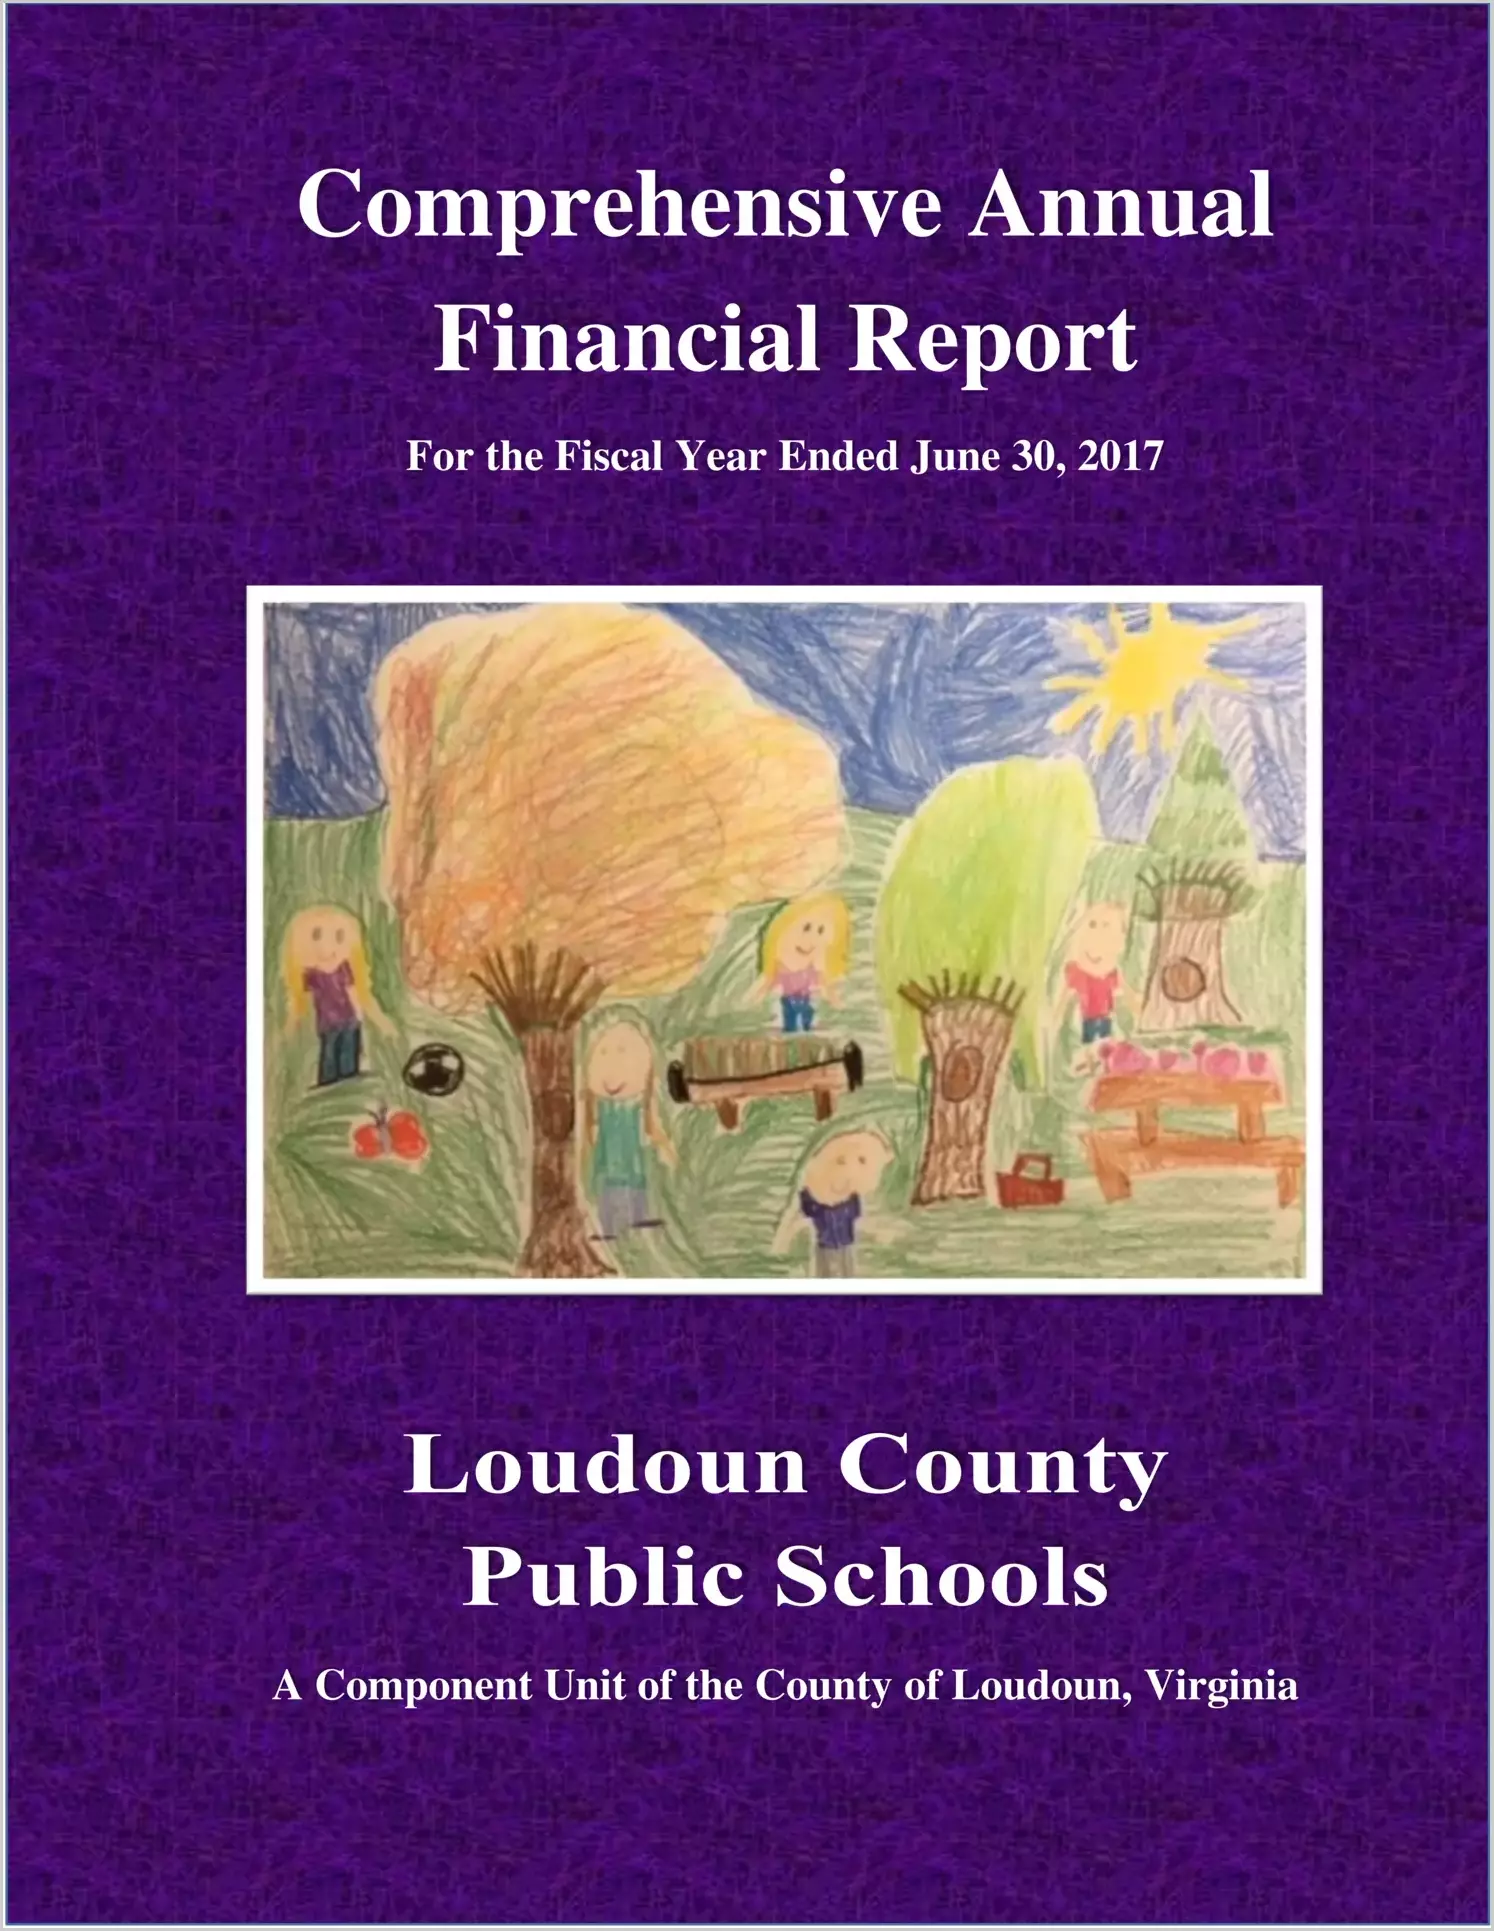 2017 Public Schools Annual Financial Report for County of Loudoun